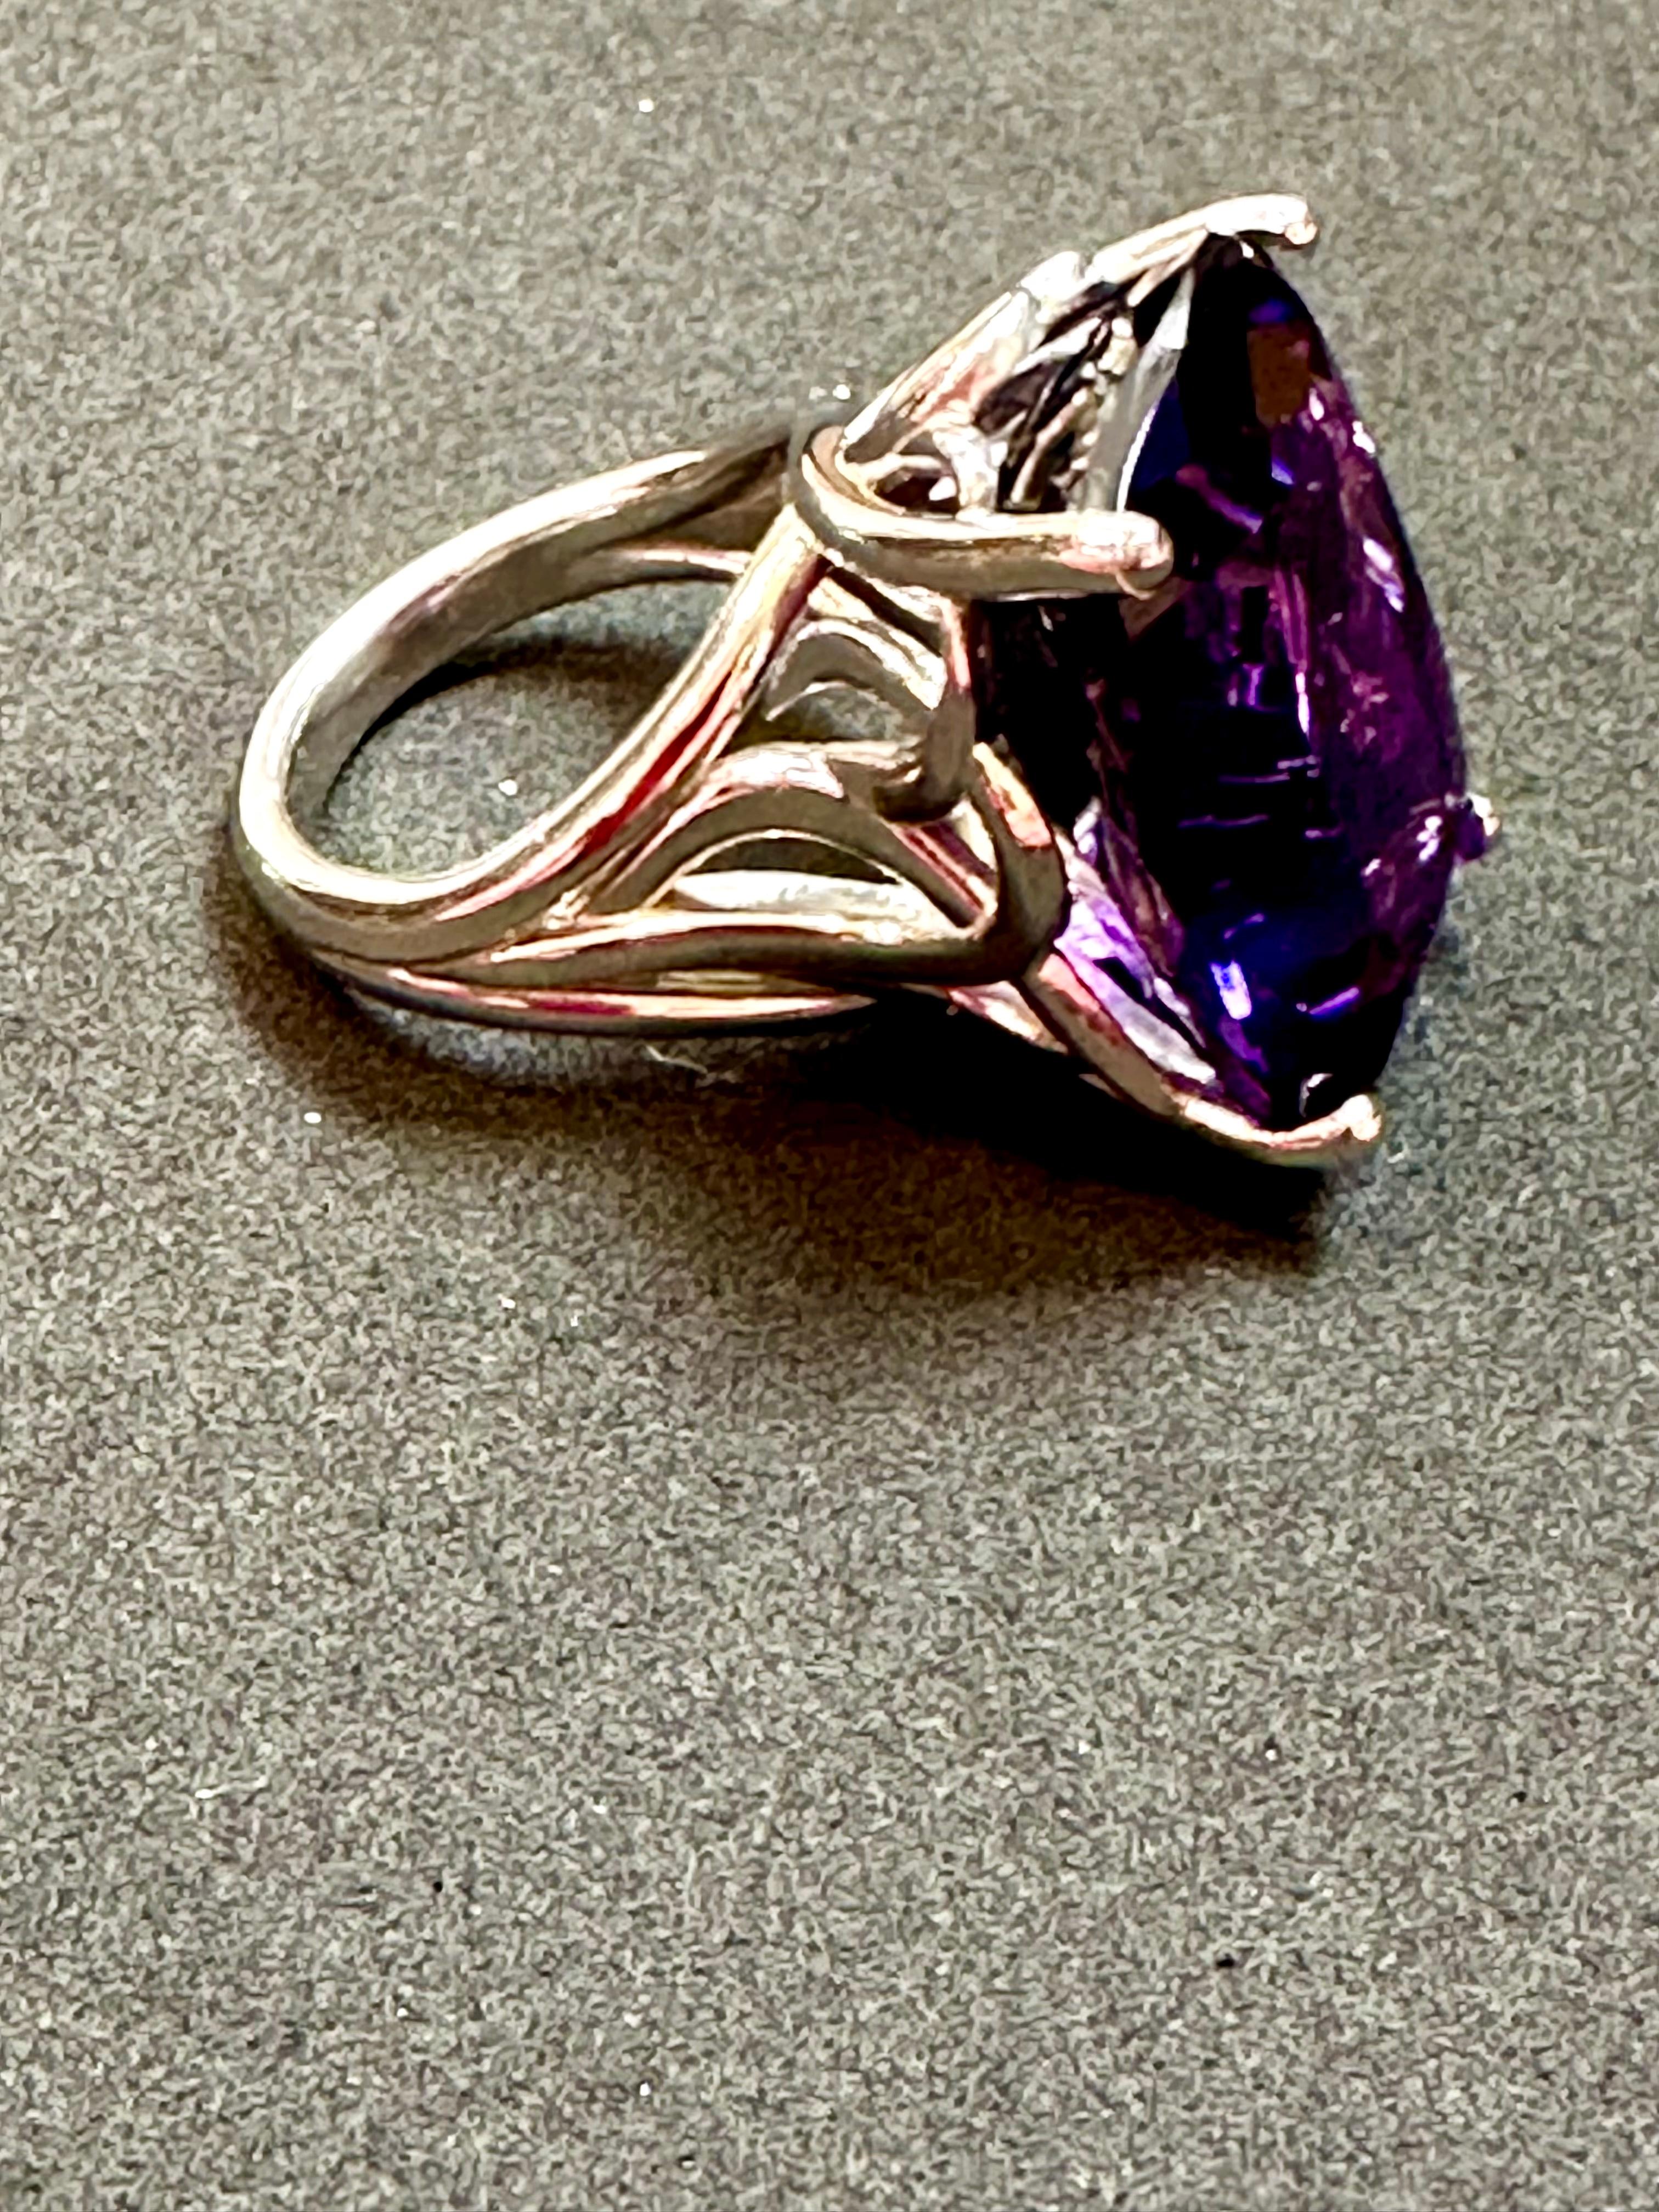 Huge 38 Carat Cushion Cut Natural Amethyst Cocktail Ring in Platinum 23.8 Gm In Excellent Condition For Sale In New York, NY